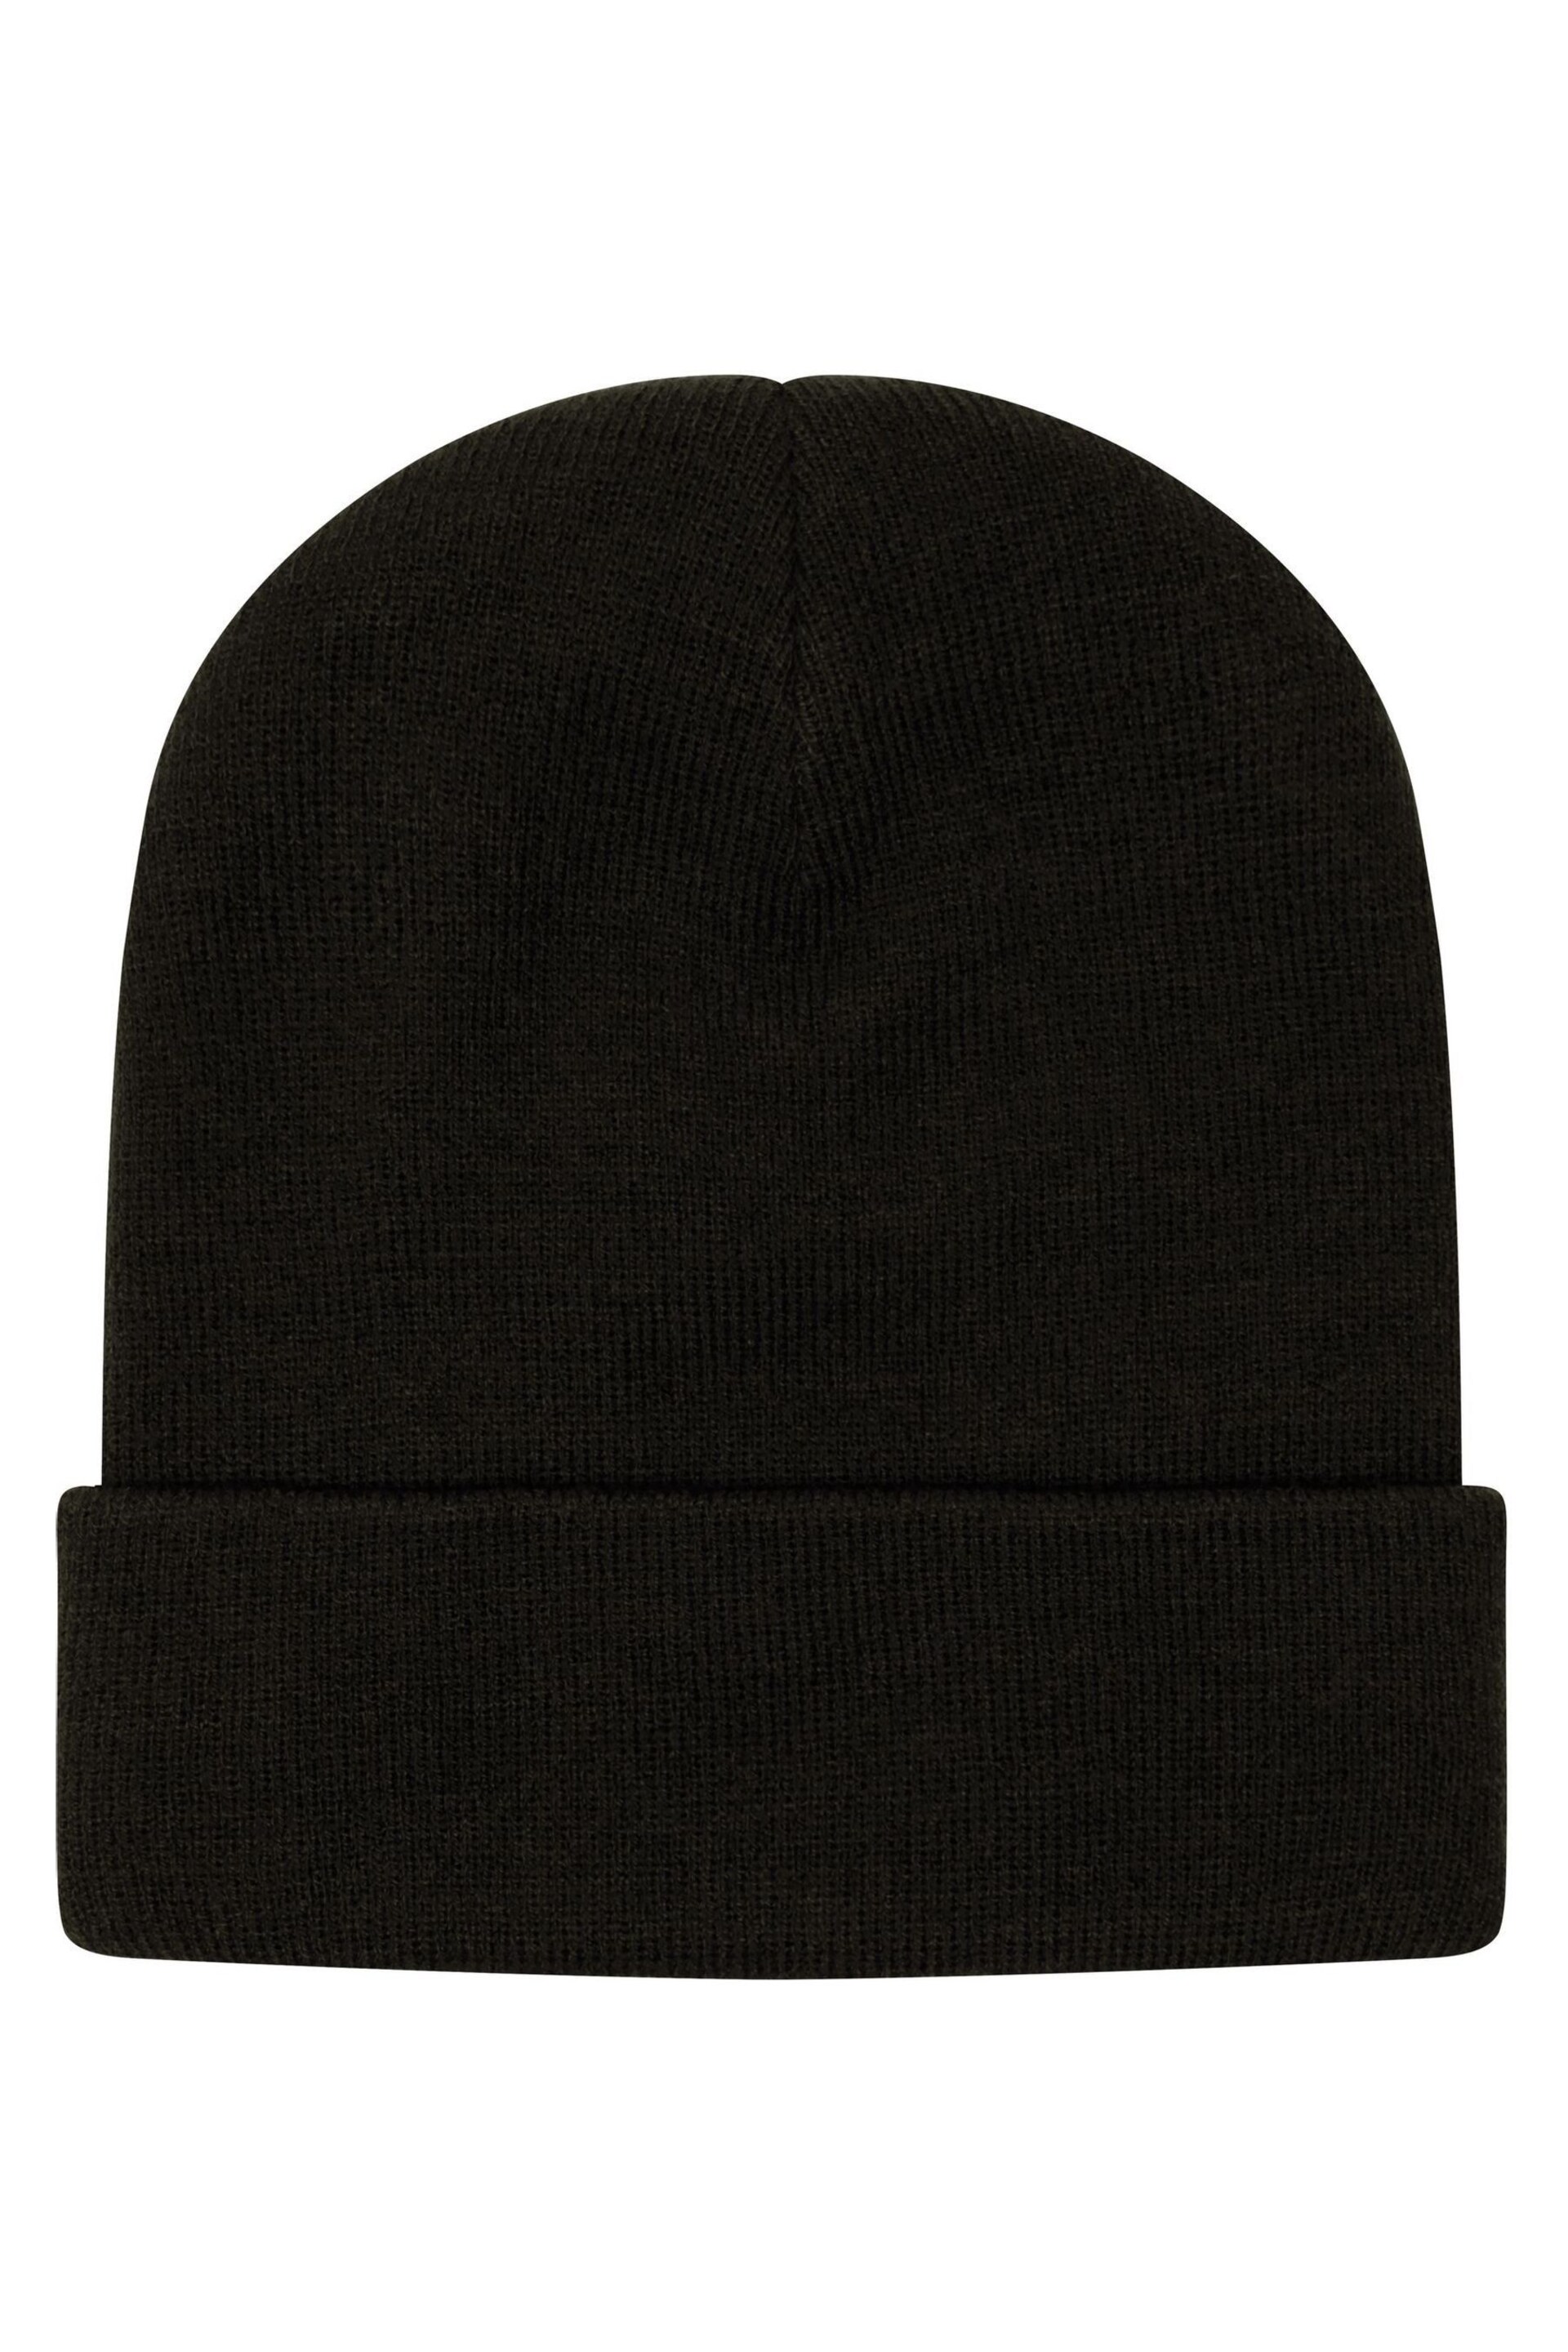 Berghaus Inflection Black Beanie - Image 2 of 8